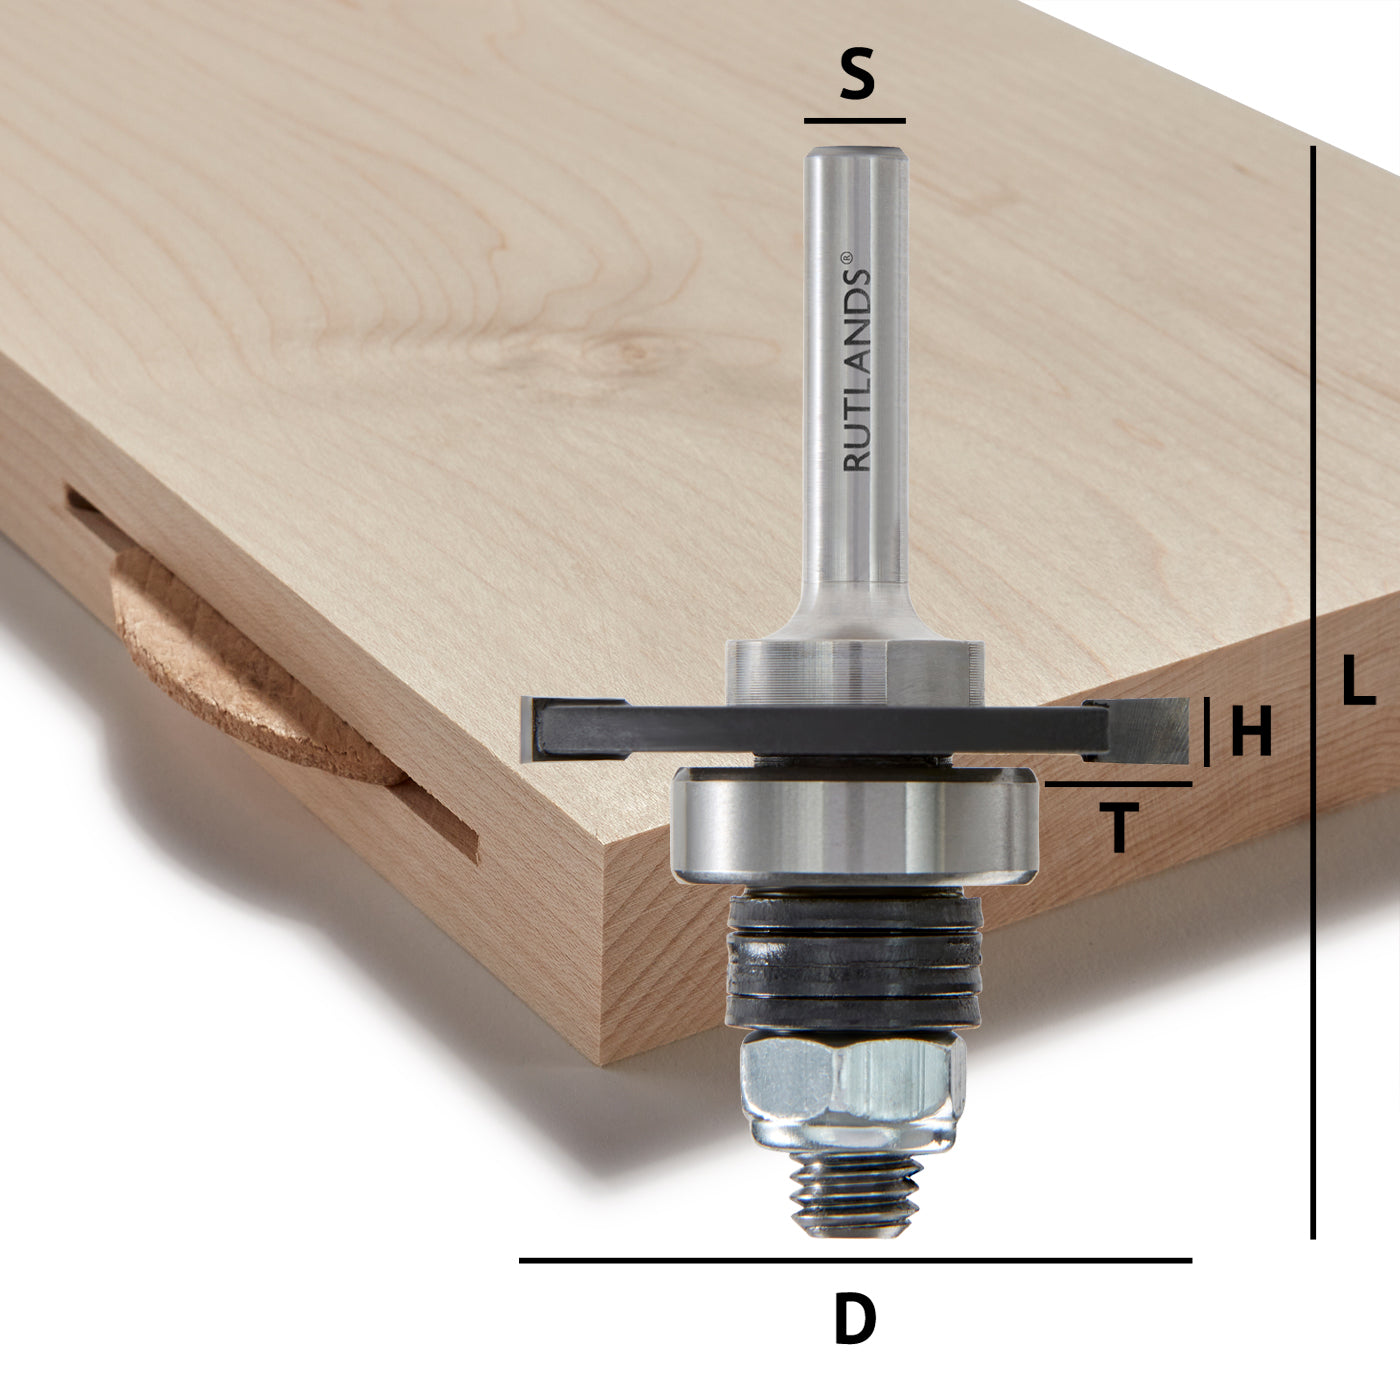 Router Bit - Slot for Biscuits No 0, 10 & 20 - D=40mm H=4mm L=65mm S=1/4"